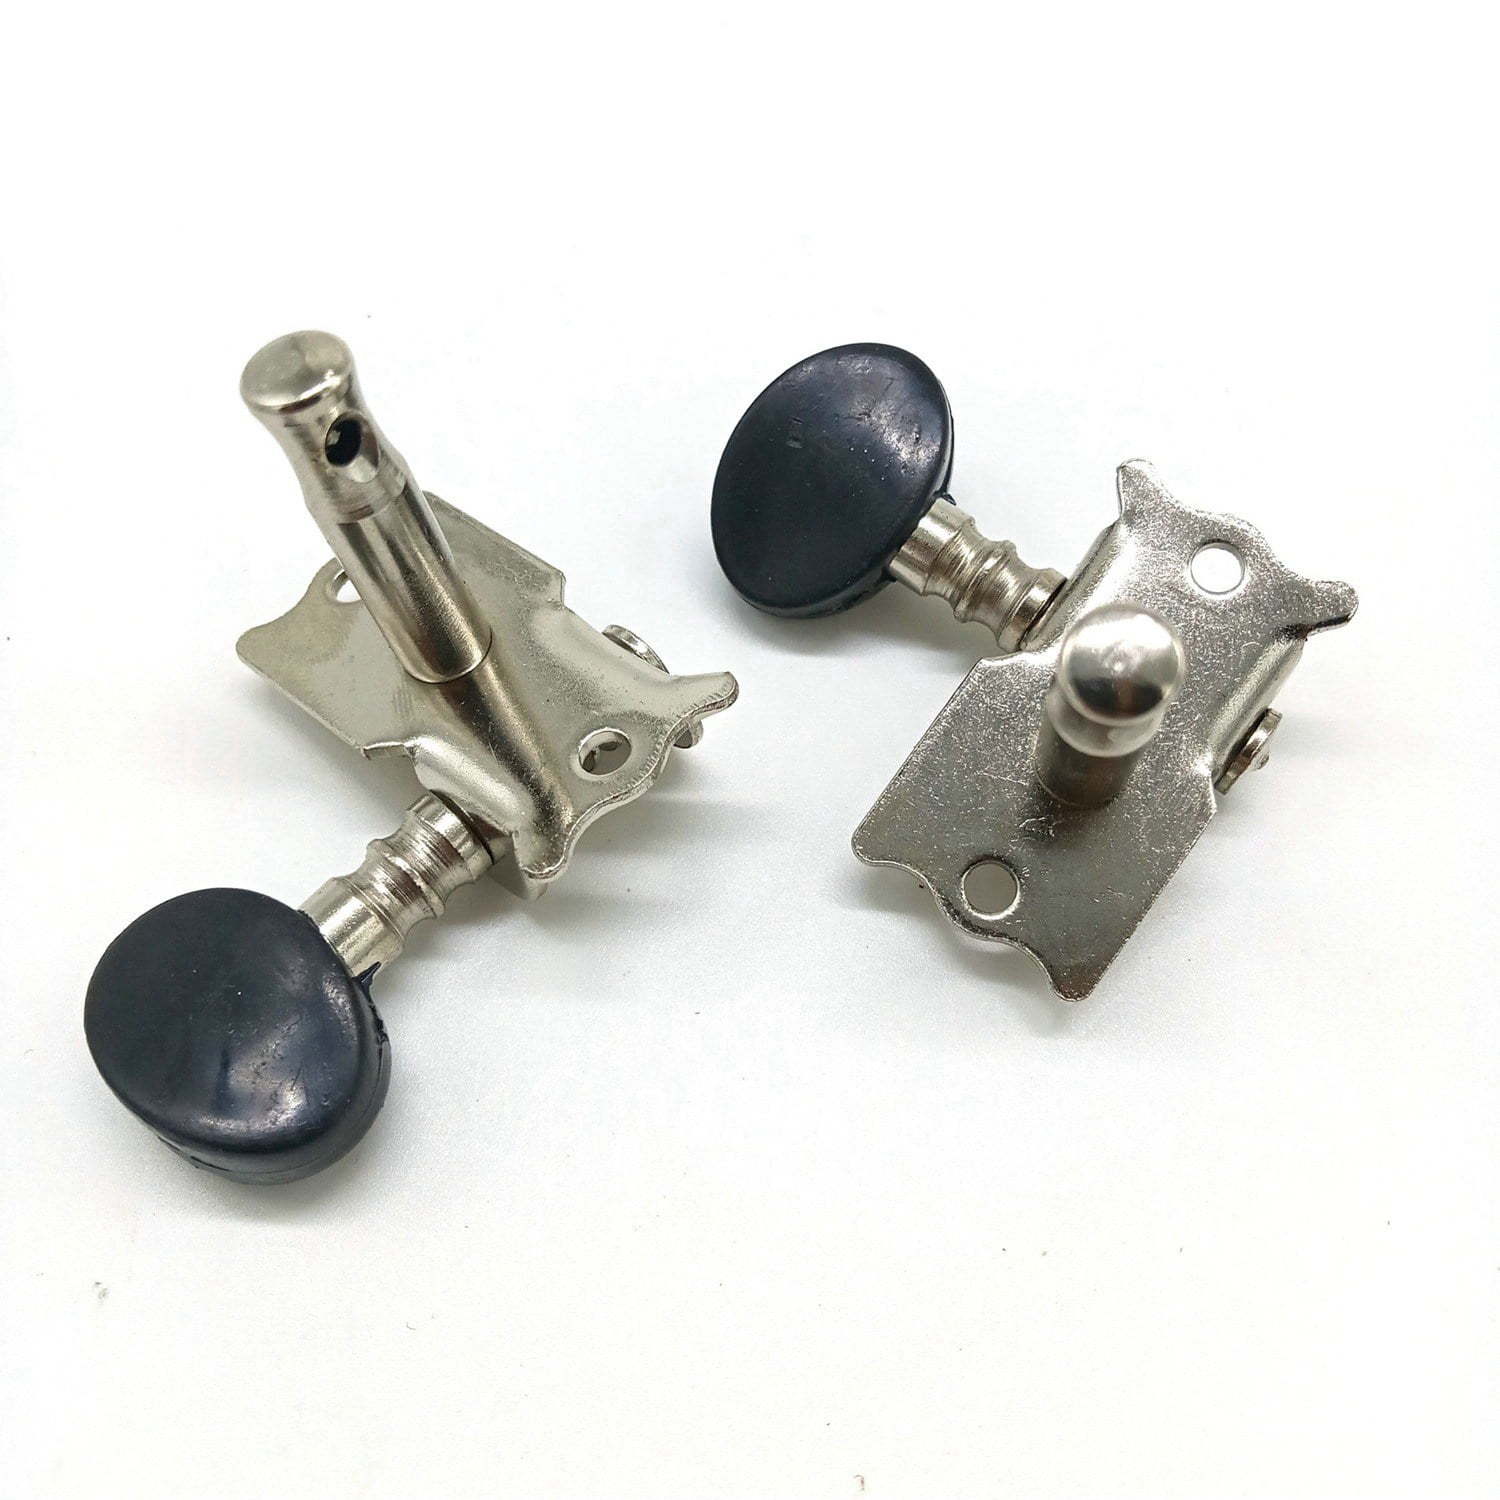 DINGGUANGHE 1 Set 2R 2L Tuning Pegs Tuners Machine Heads for 4 String Ukulele Guitar Bass Parts 